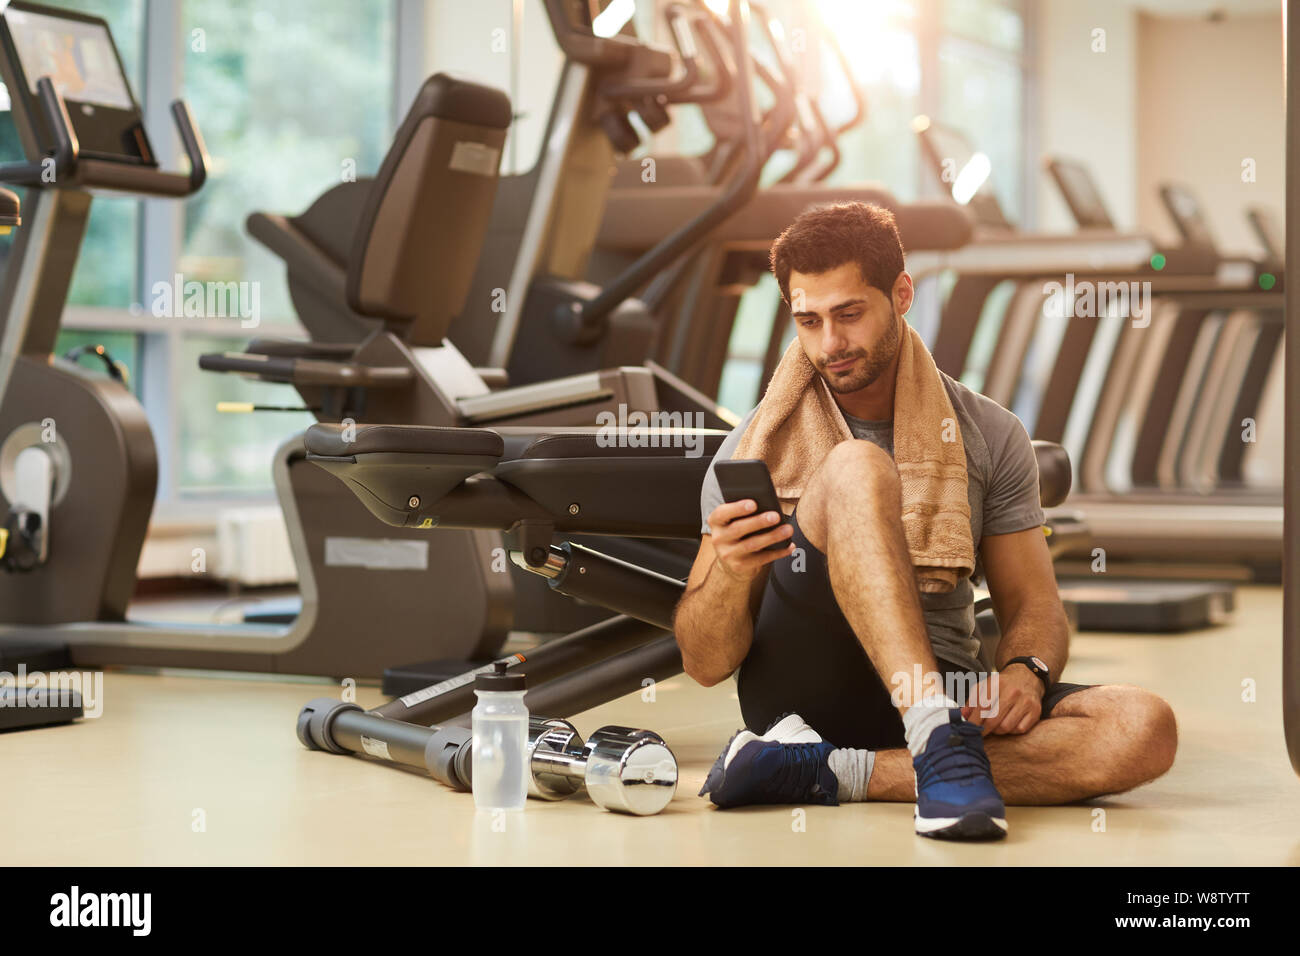 Full length portrait of handsome man resting sitting on floor in gym and using smartphone, copy space Stock Photo